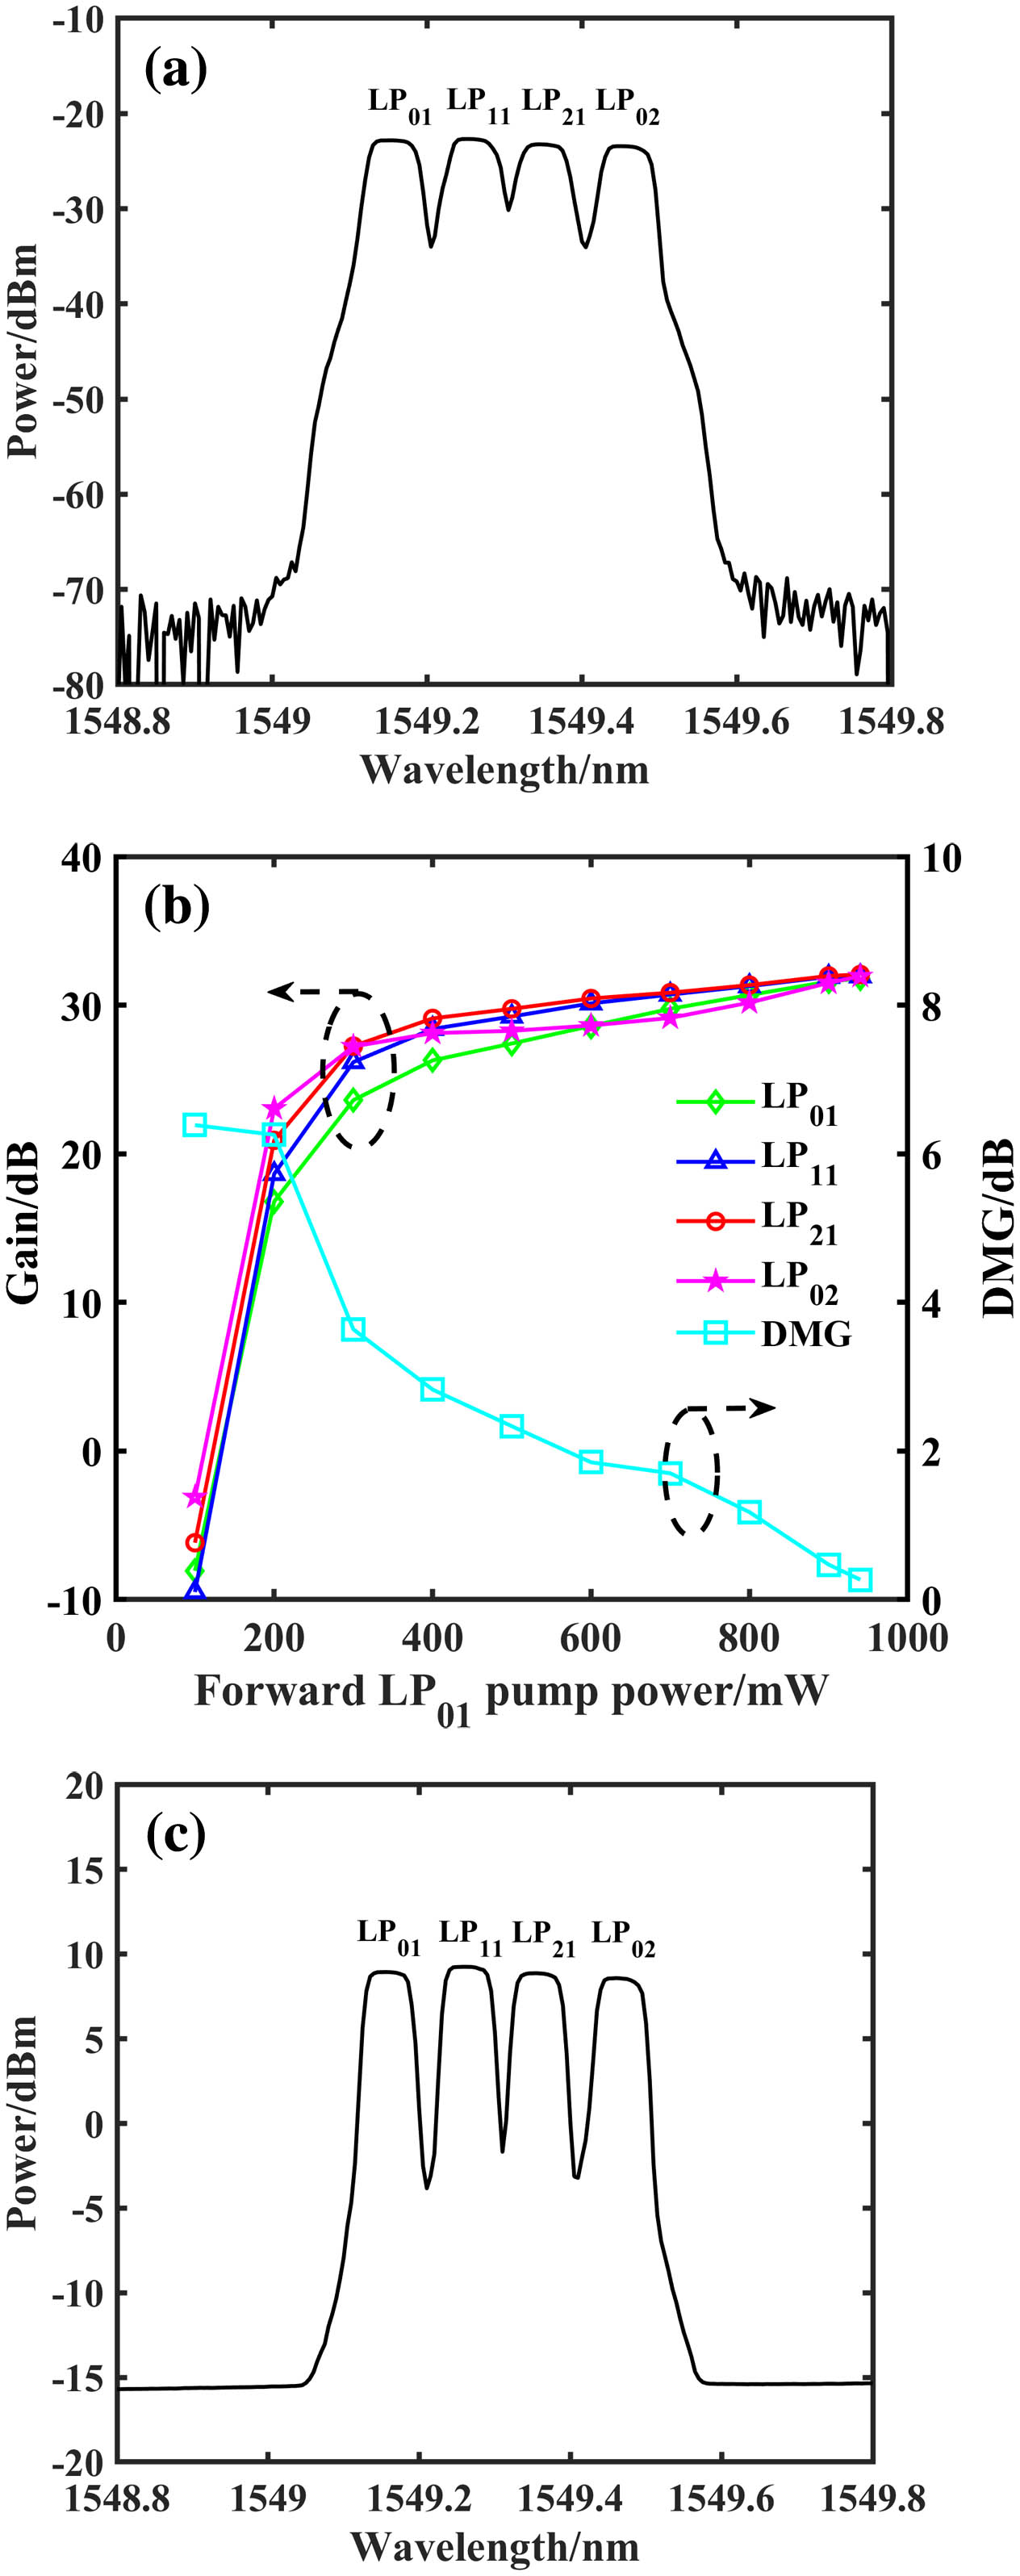 Experimental results for the IWDM-based FM-EDFA. (a) The input signal spectrum, (b) the variations of the modal gain and the DMG with the forward LP01-mode pump power, and (c) the output spectrum at the pump power of 940 mW.